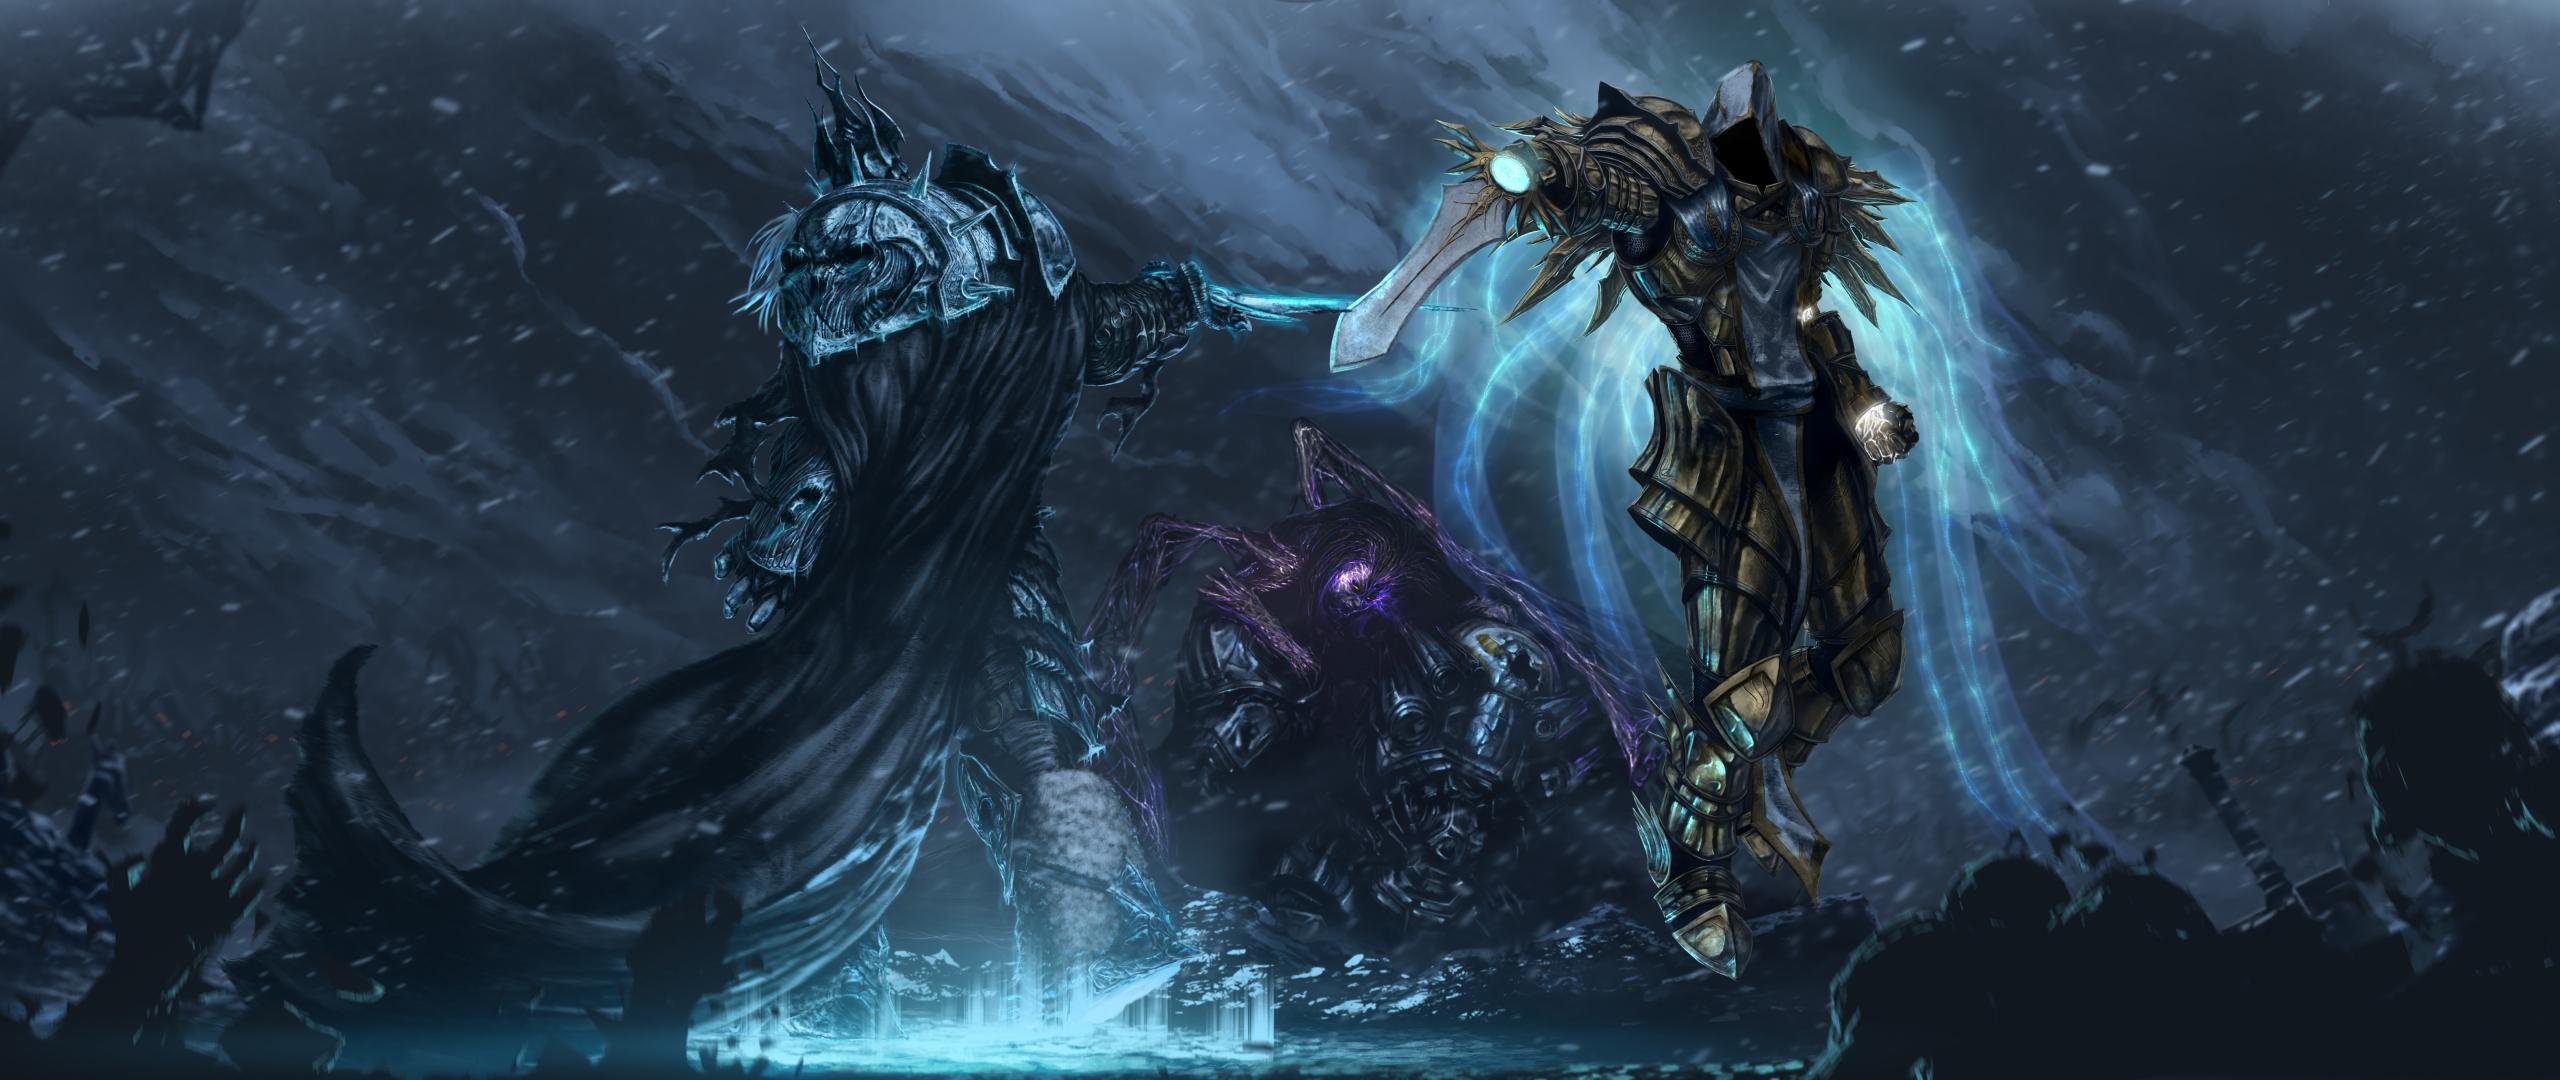 Best Heroes Of The Storm background ID:259859 for High Resolution hd 2560x1080 desktop